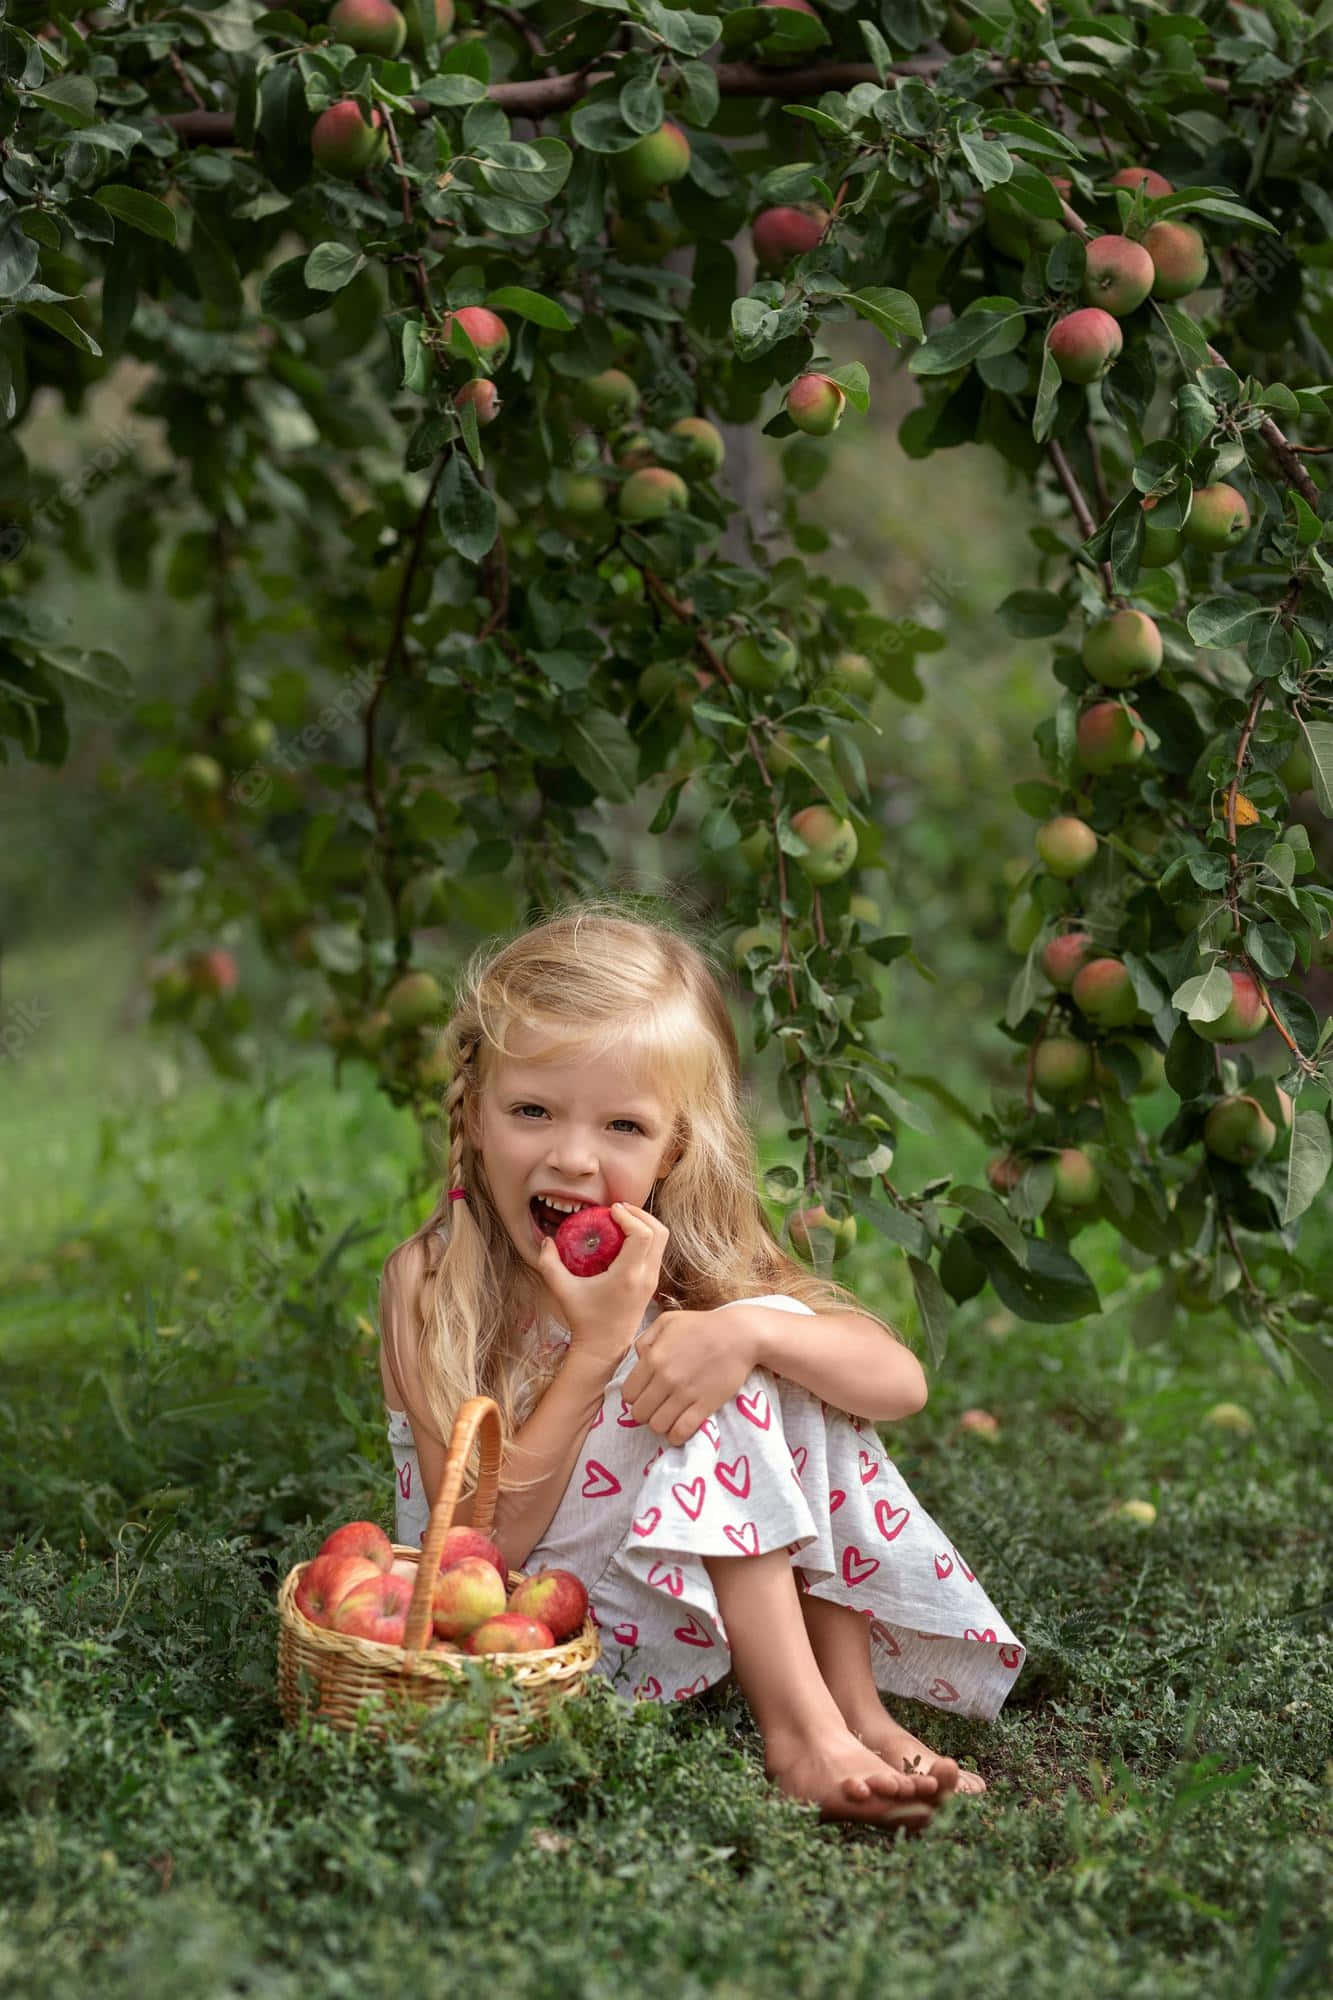 A Plentiful Harvest At The Apple Orchard Wallpaper